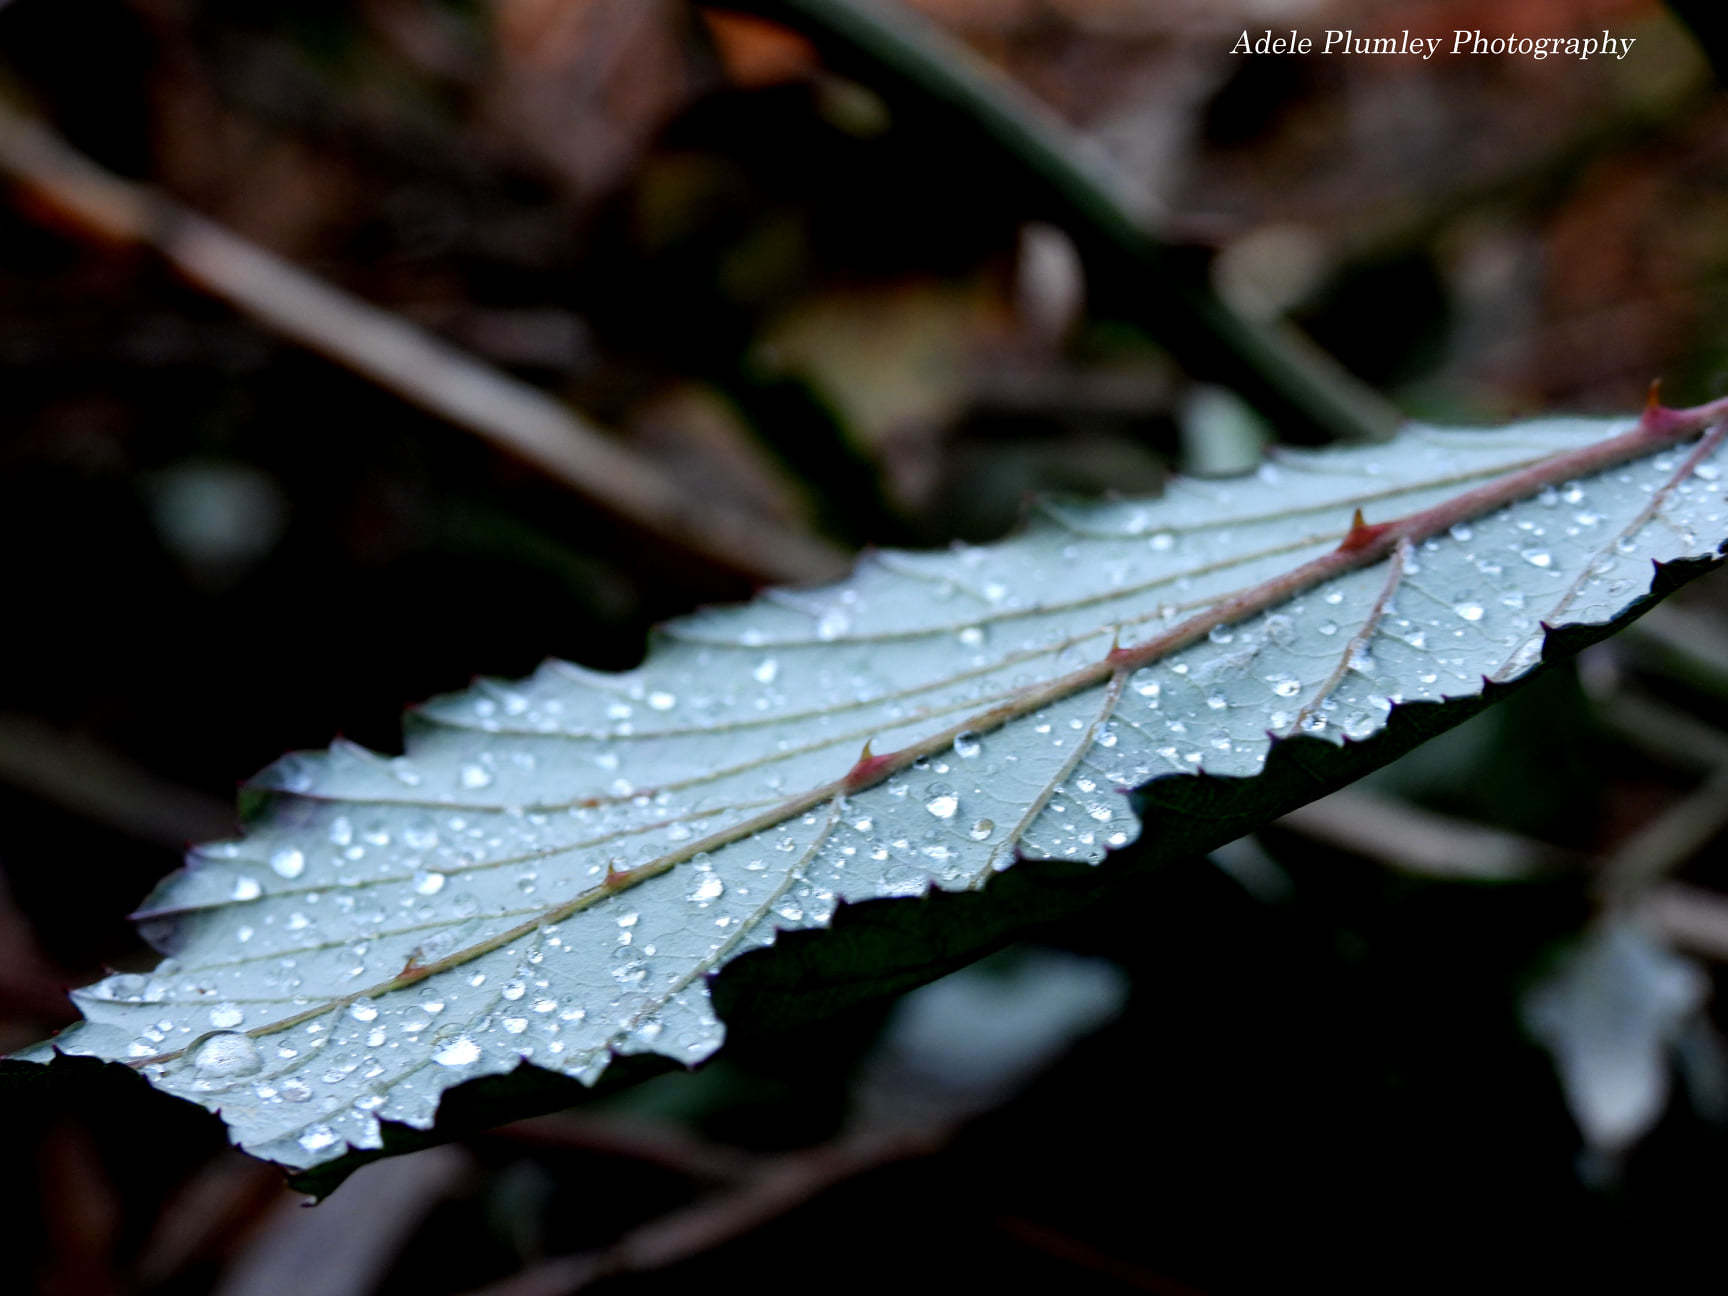 One of many wet leaves in the county (Adele Plumley)